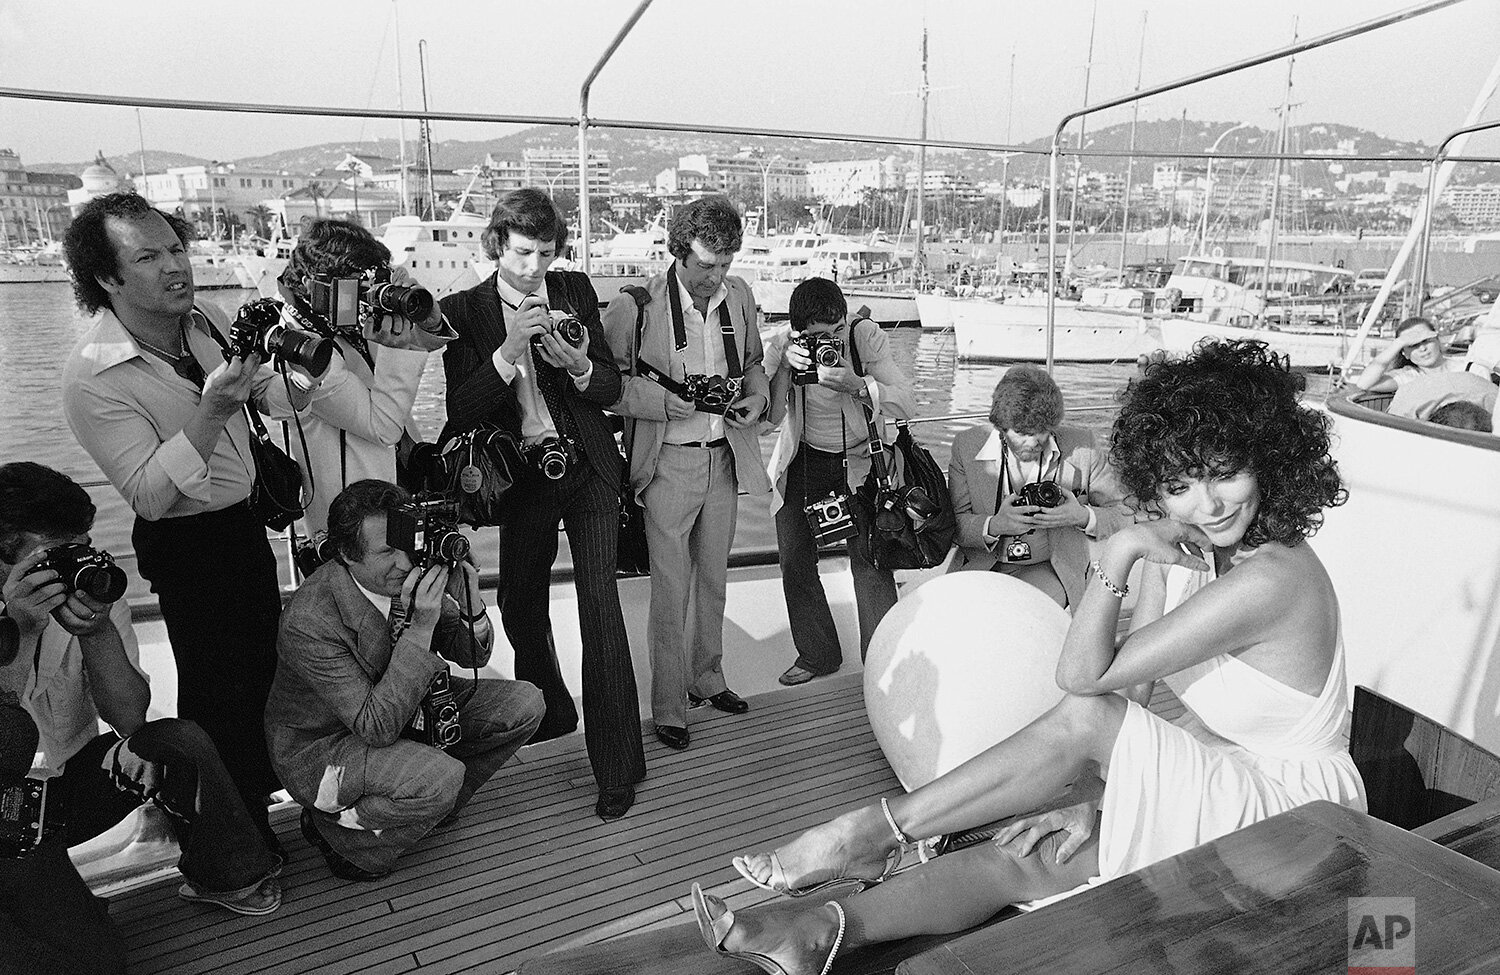  British actress Joan Collins poses at the 32nd International Film Festival, on May 13, 1979, in Cannes, France. (AP Photo/Jean-Jacques Levy) 